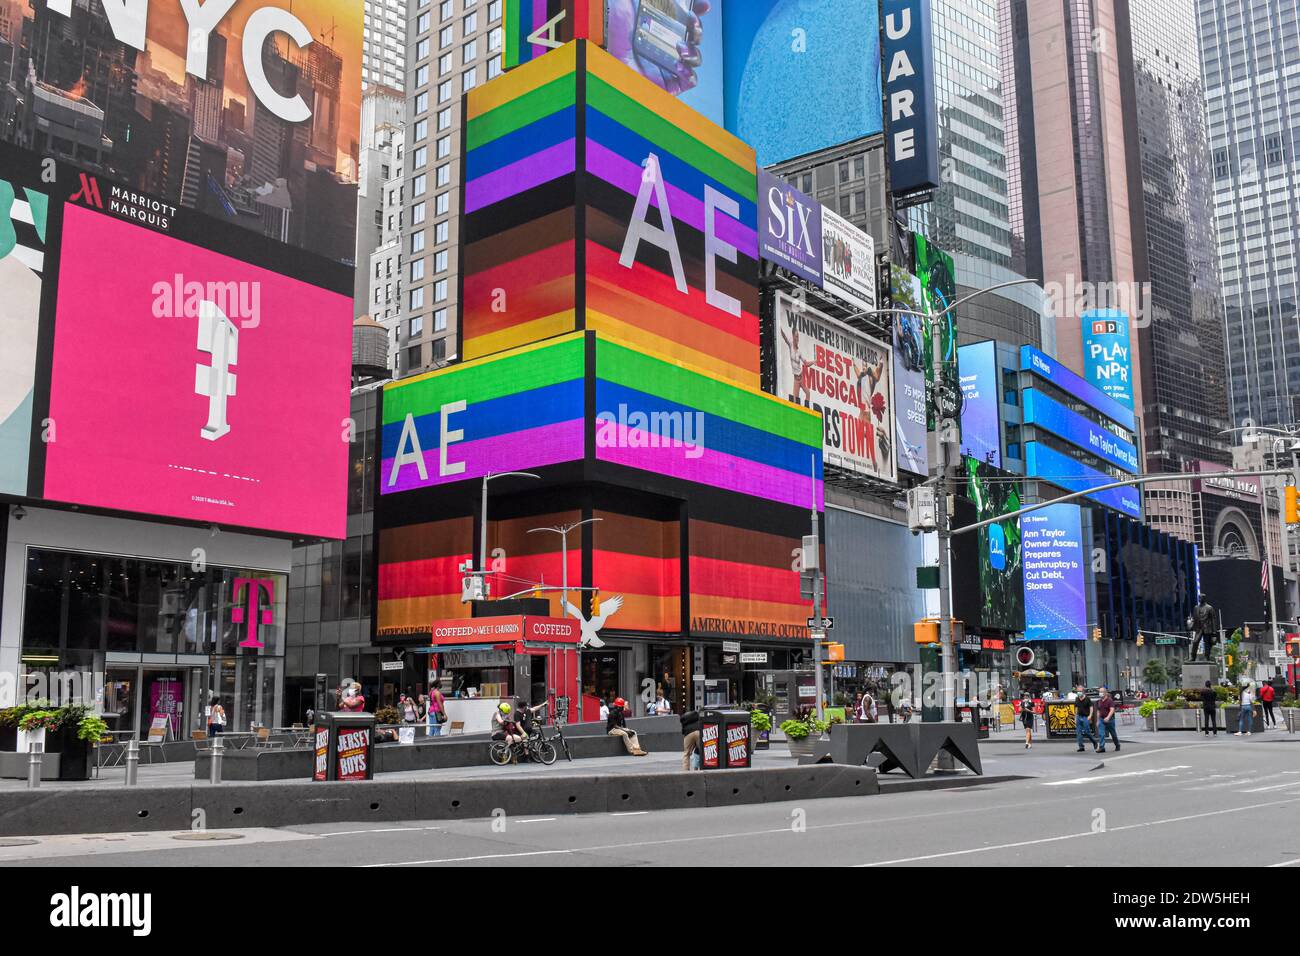 American Apparel Showing Their Support For LGBT Rights Around Pride Month in New York City Stock Photo